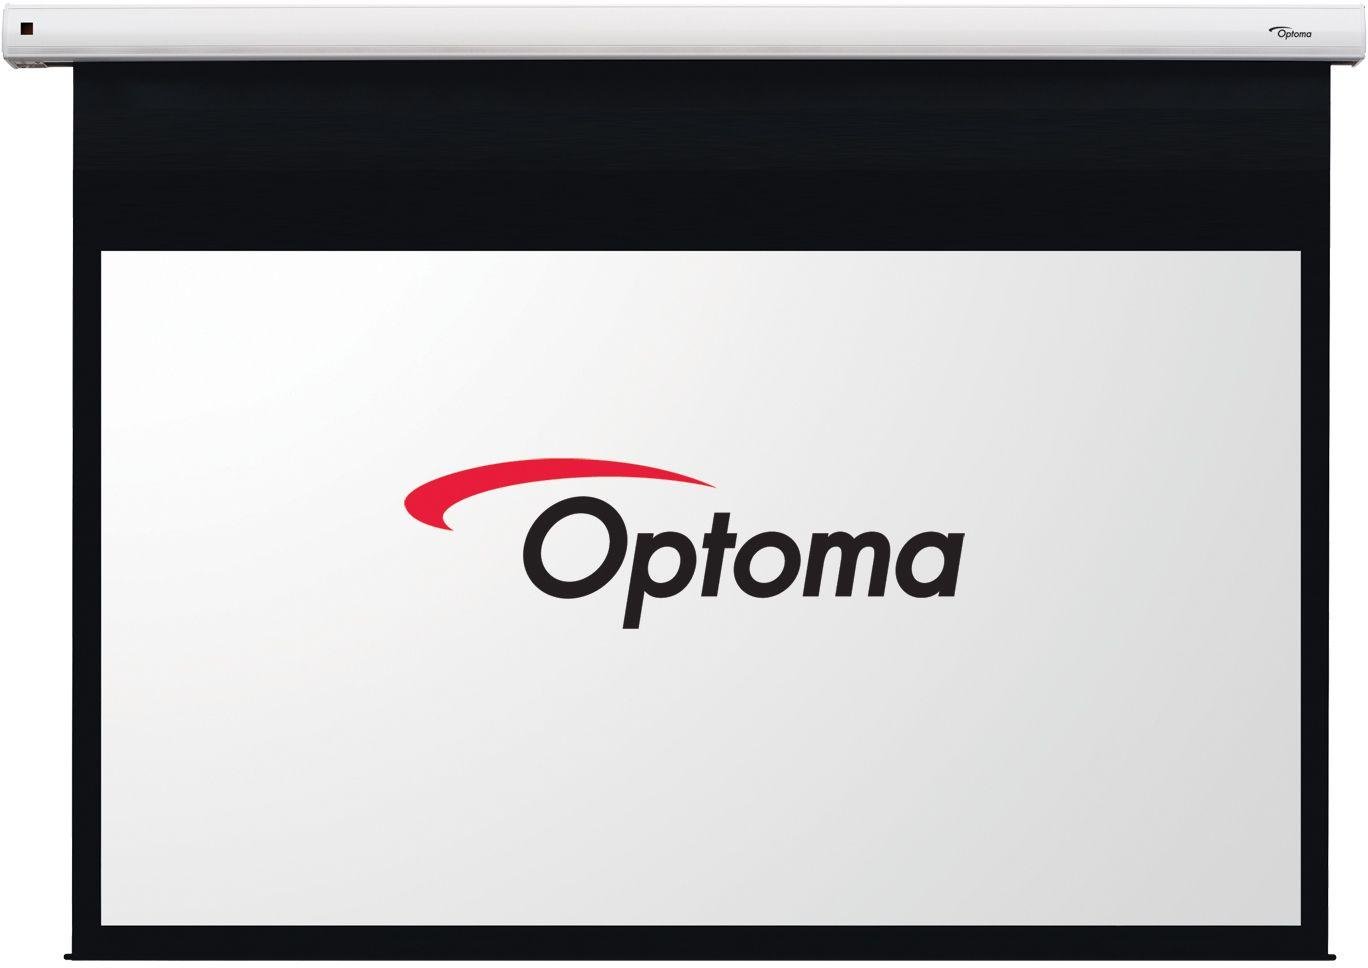 Optoma 92in 16:9 Projection Screen. Review